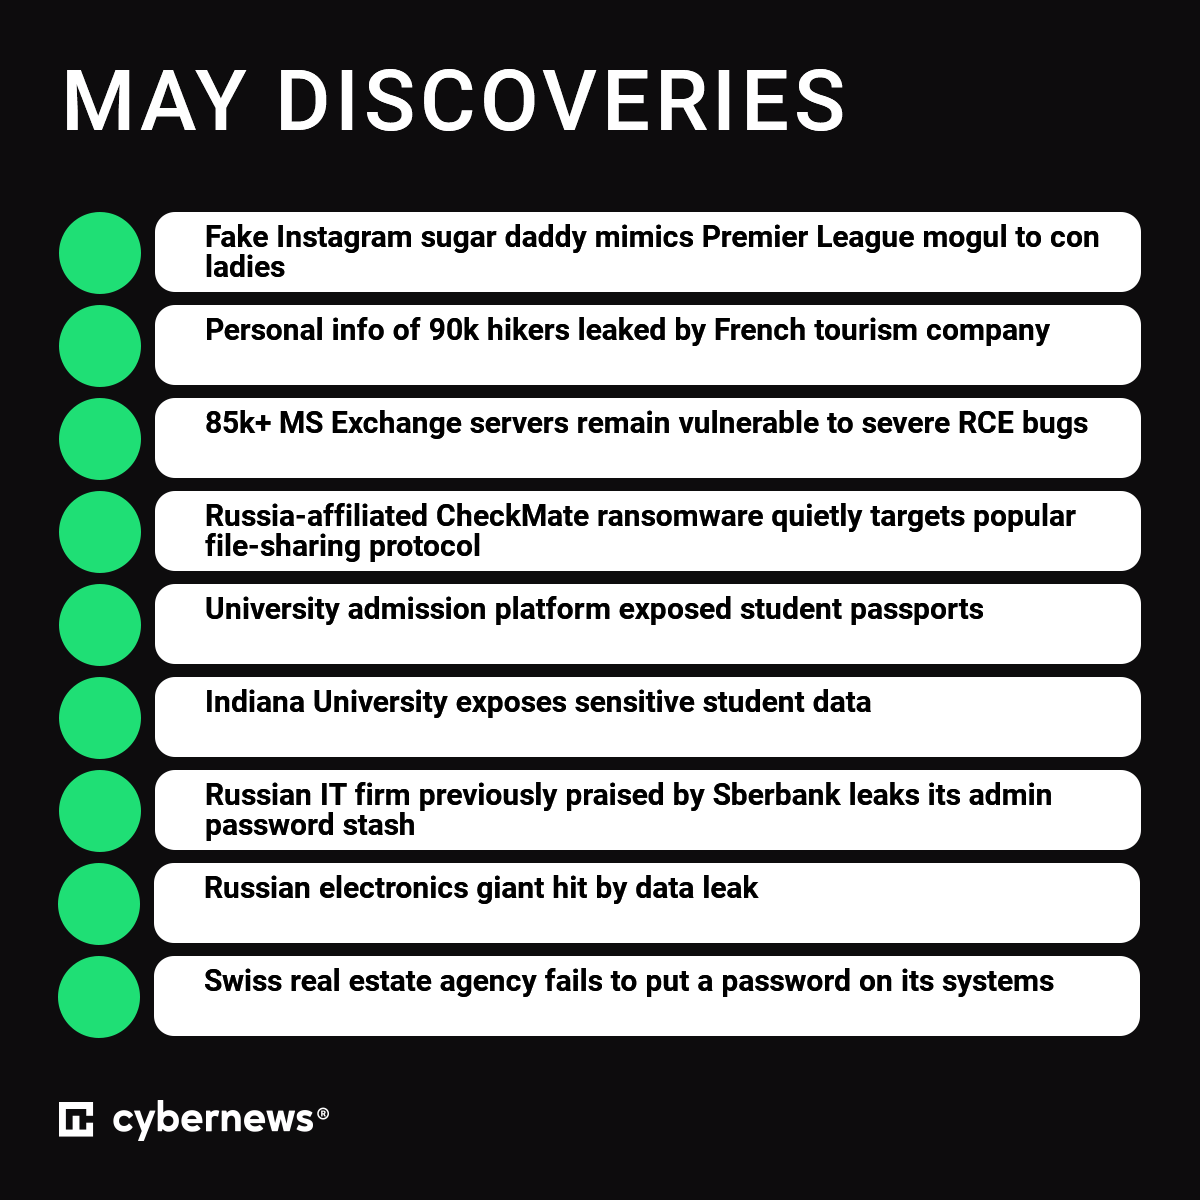 🌪 Here’s @Cybernews's monthly #research wrap-up, showcasing our latest findings and discoveries. Throughout May, our mission has been to identify and responsibly disclose #cybersecurity threats and #vulnerabilities across the #online realm. Links in🧵⤵️
▪️▪️▪️
#infosec #dataleak